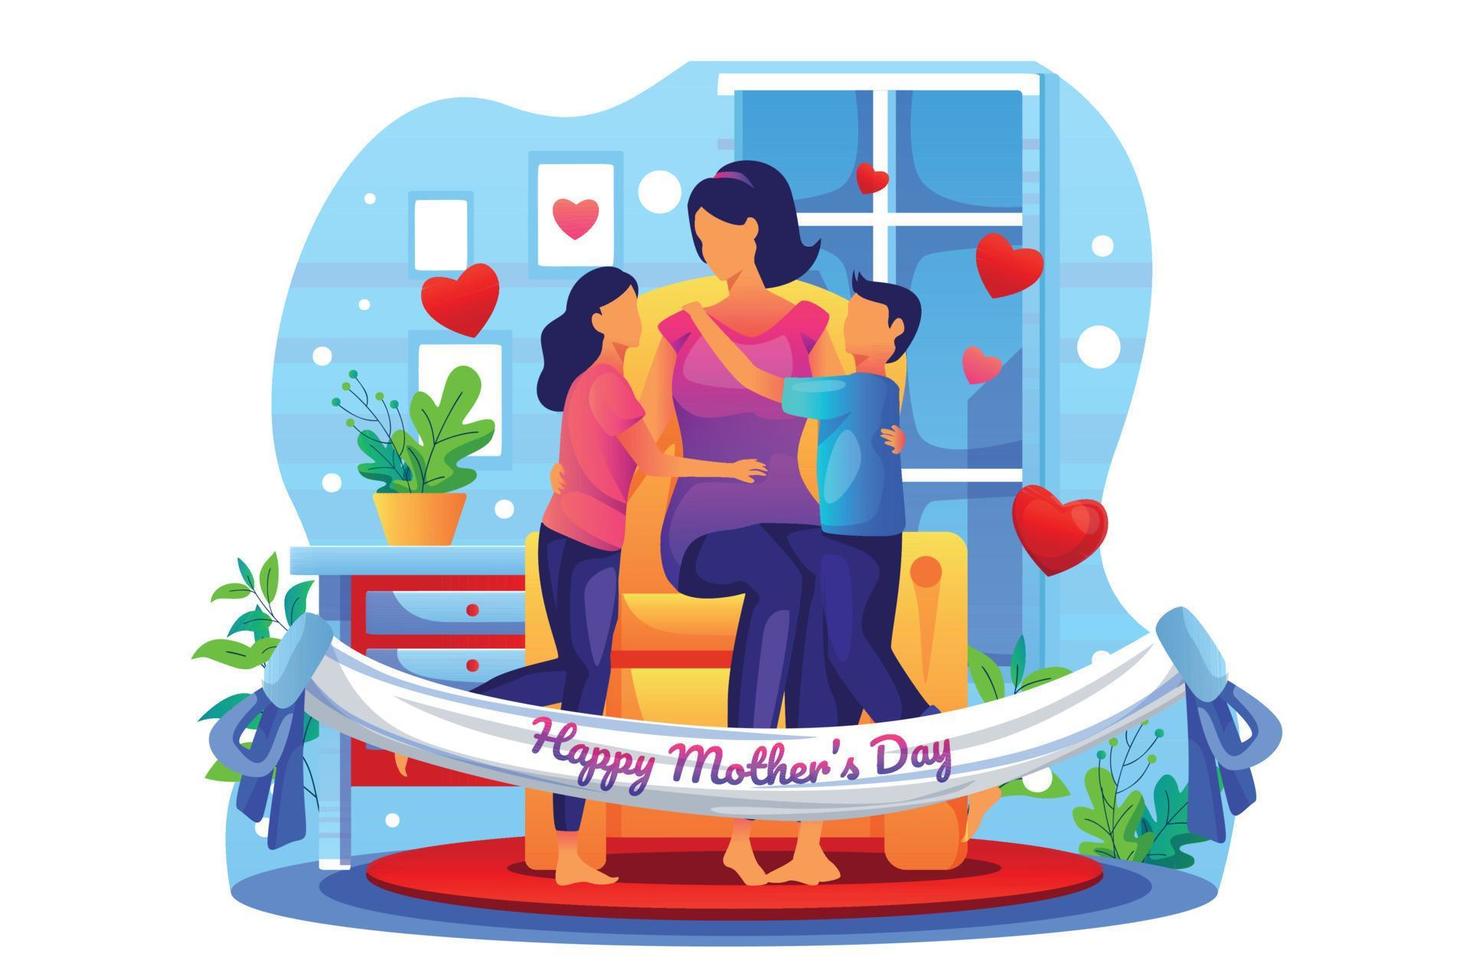 Celebration of children together with their mother in the living room hugging with gifts vector